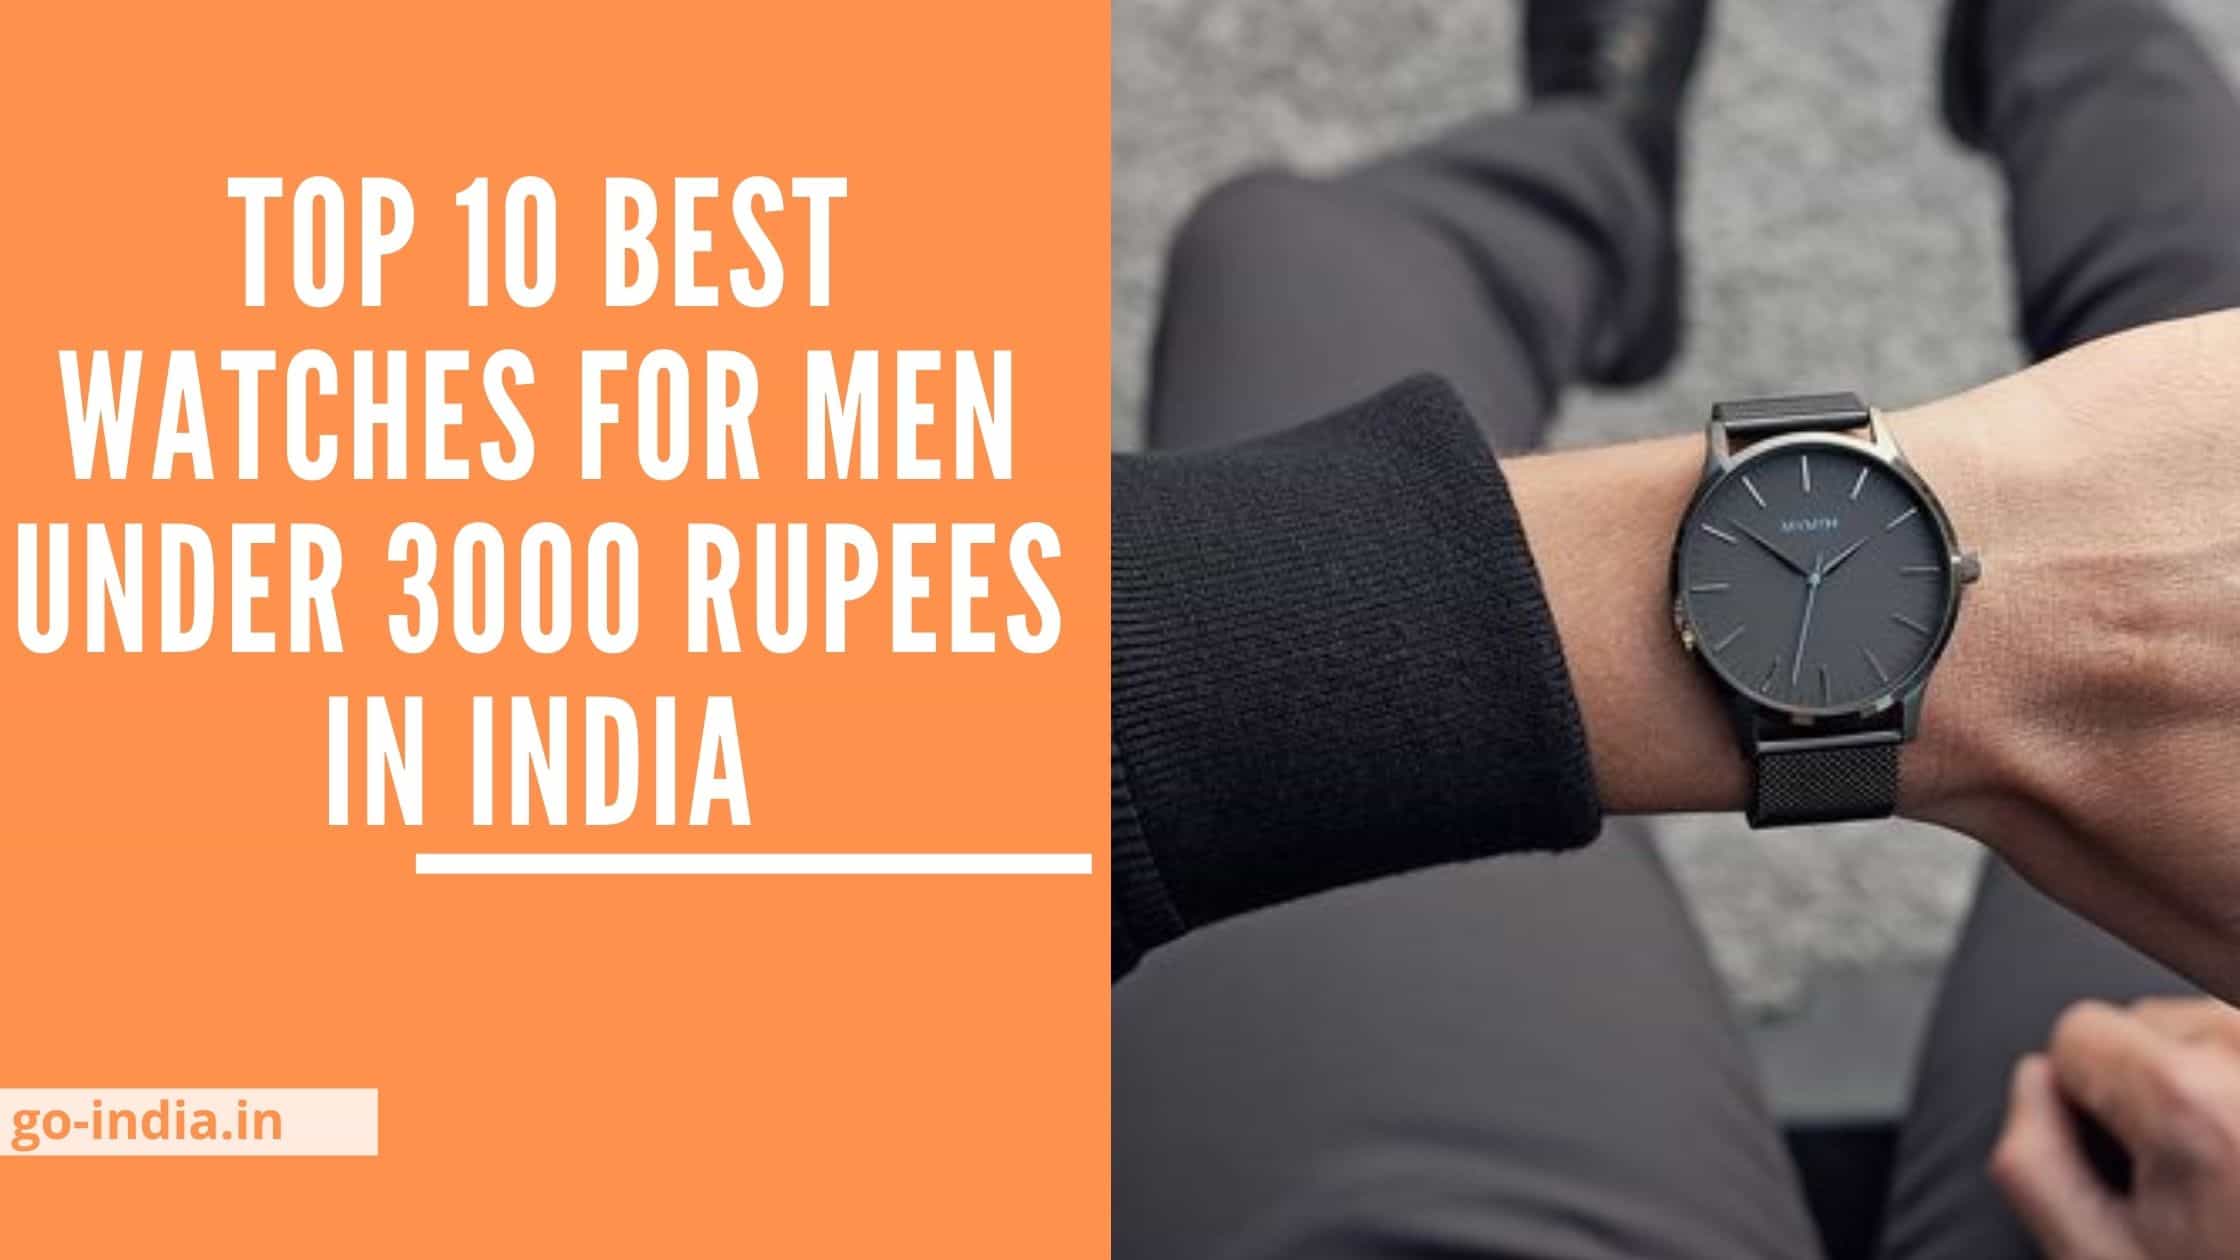 Top 10 Best Watches For Men Under 3000 Rupees in India